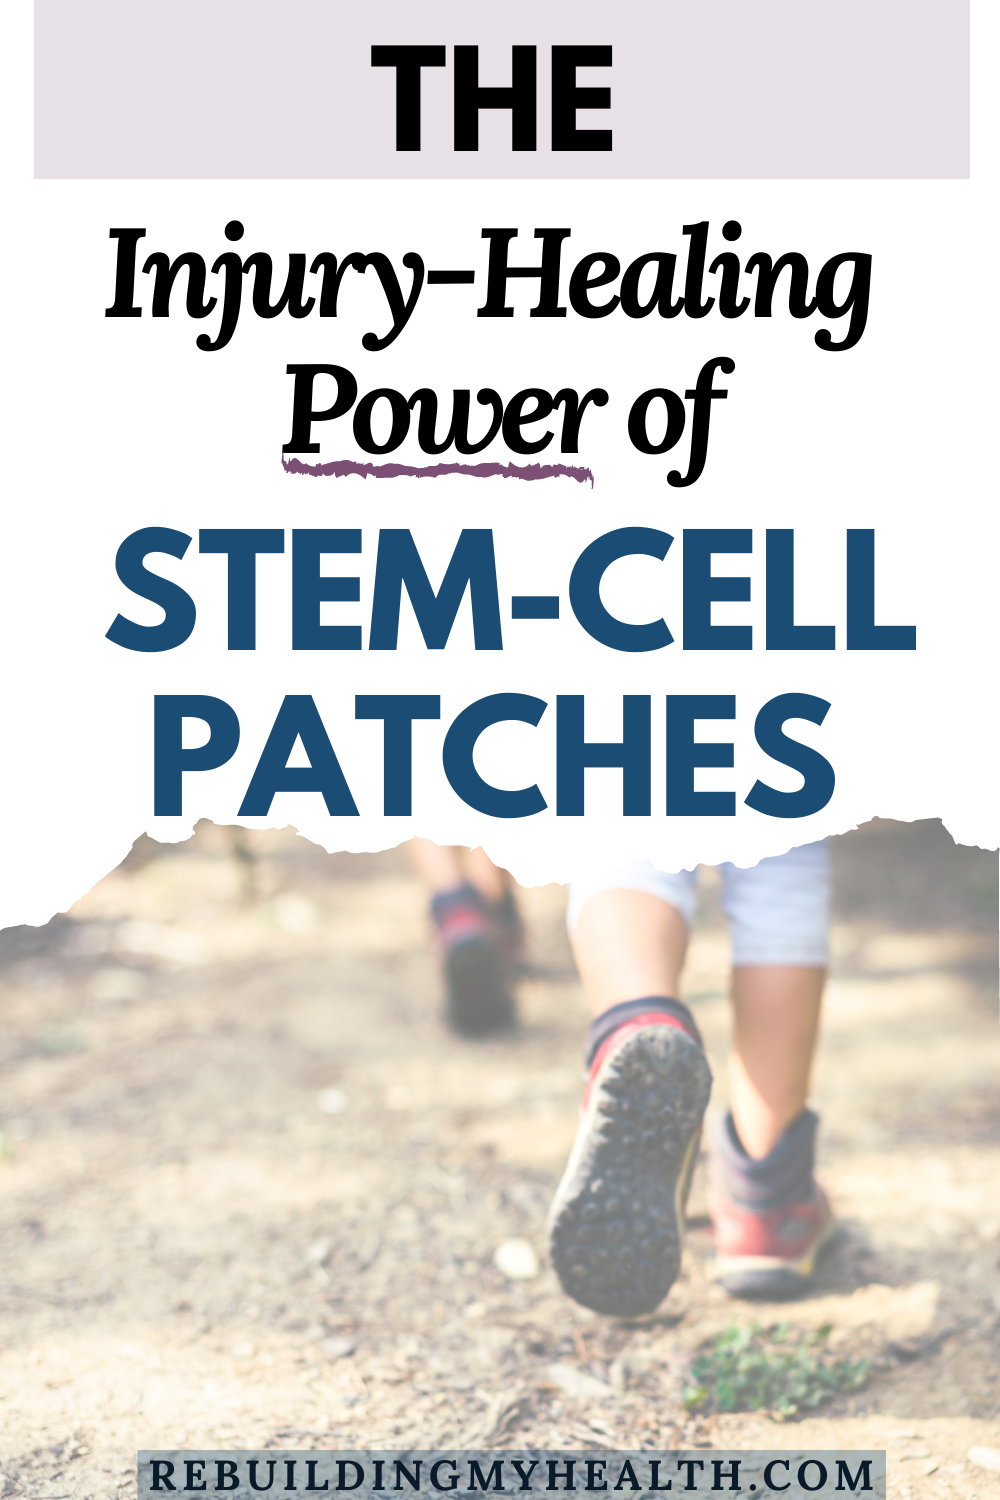 Learn how one woman healed a decades-old injury with LifeWave X39 stem-cell patches.